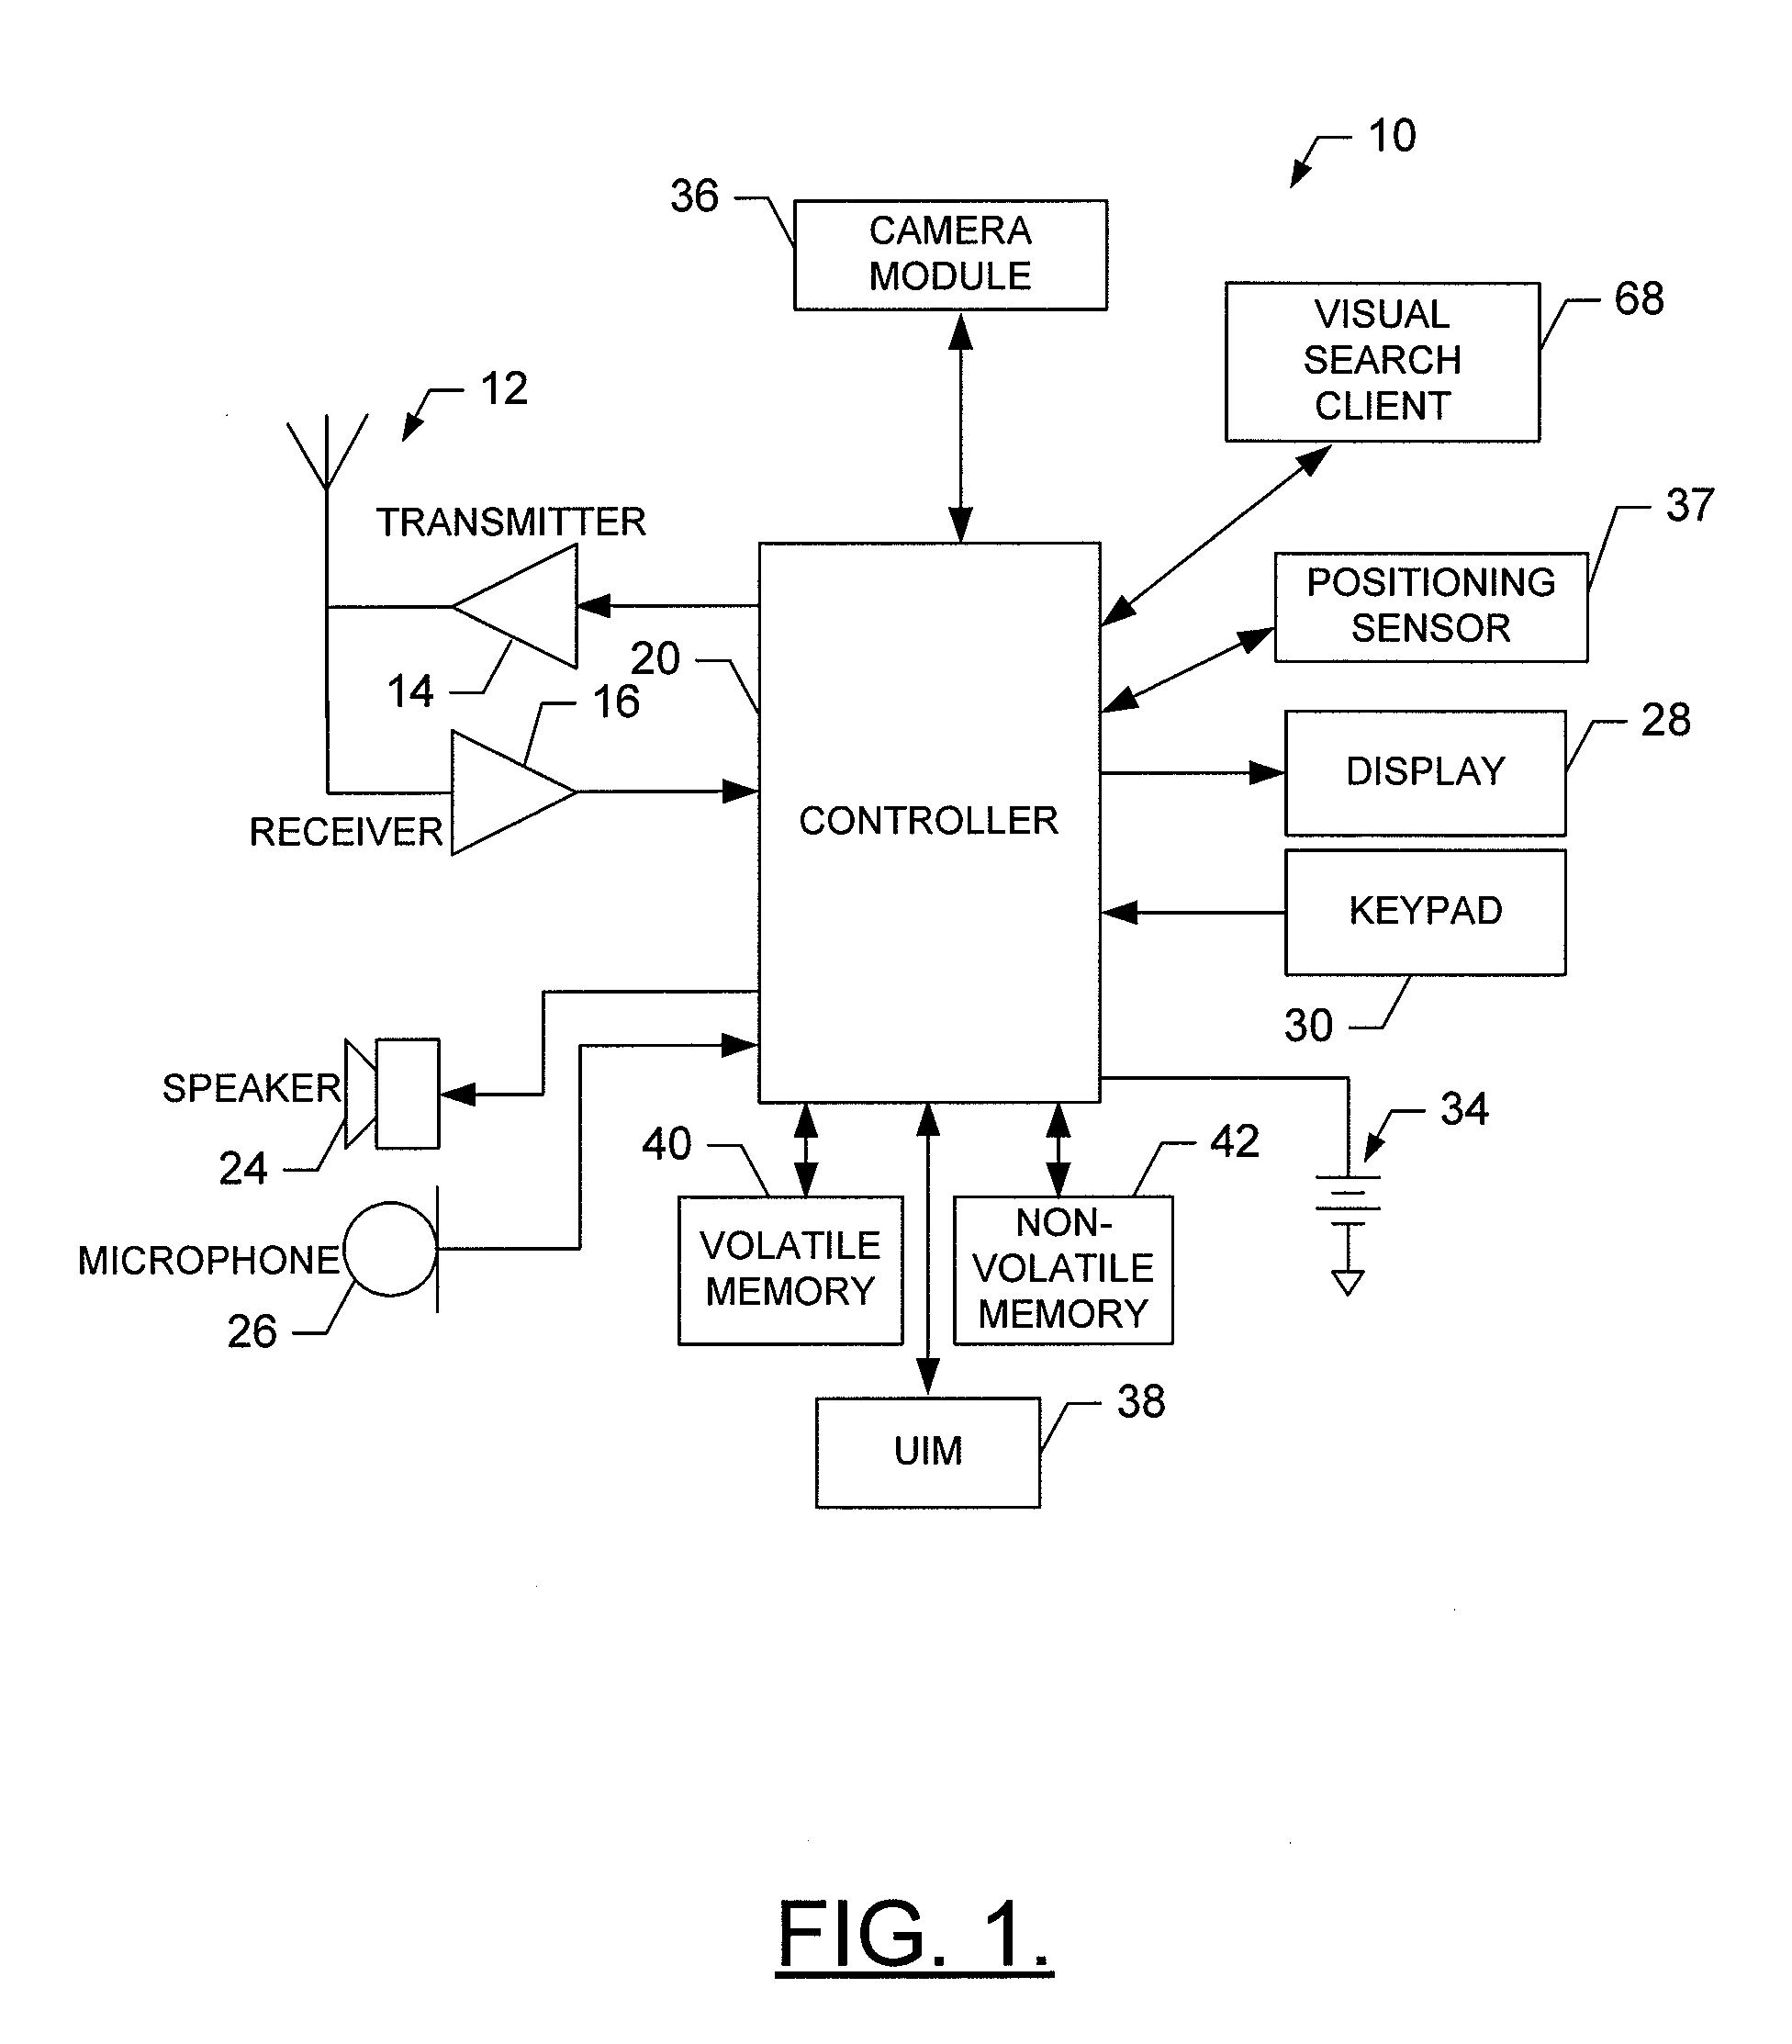 Method, Apparatus and Computer Program Product for Performing a Visual Search Using Grid-Based Feature Organization